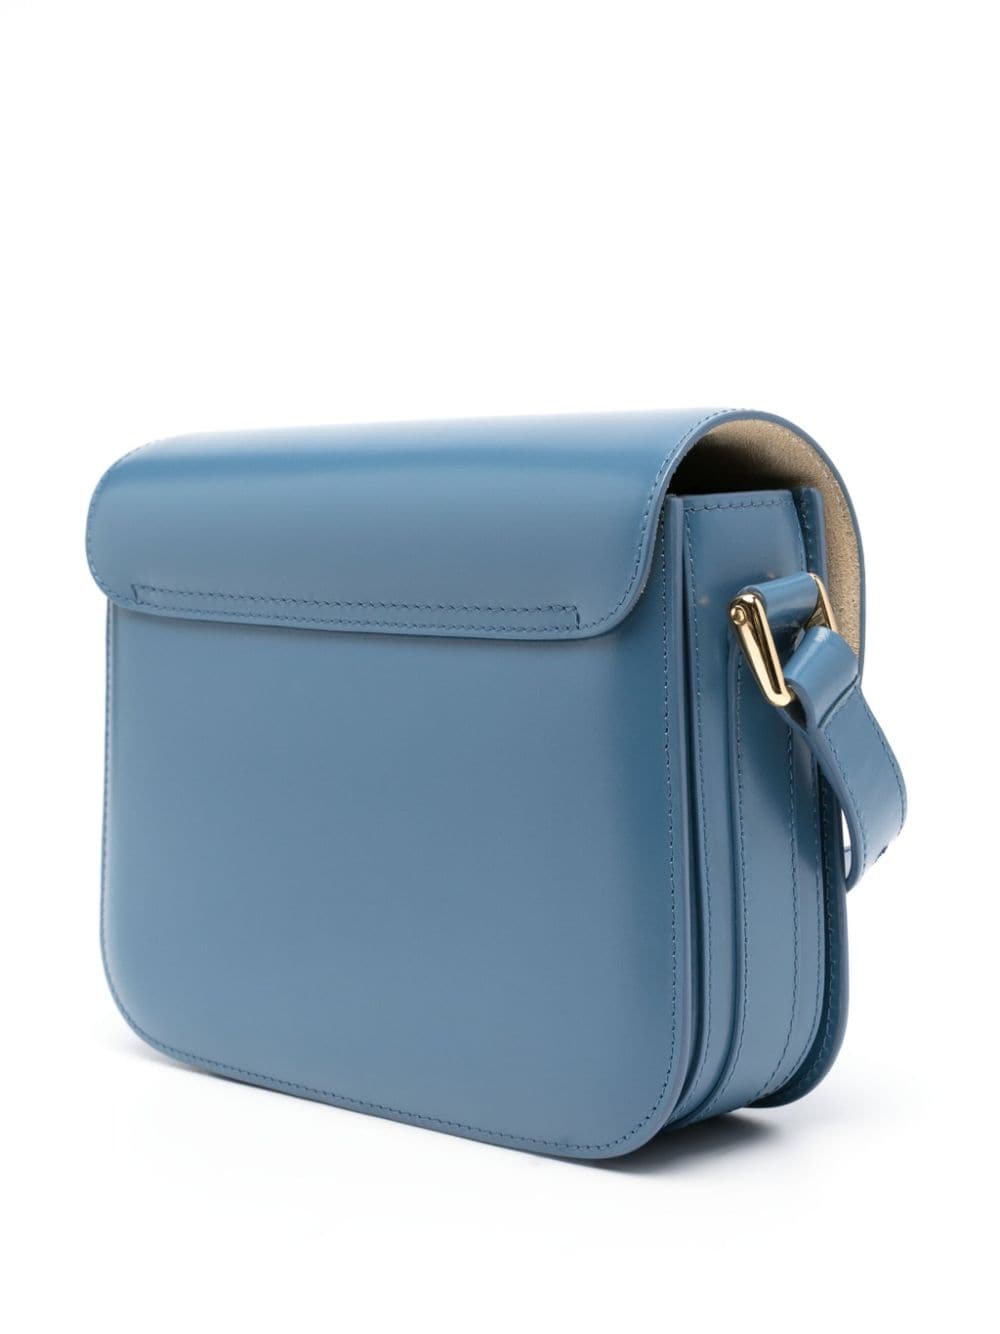 A.P.C. Ocean Blue Small Grace Leather Shoulder Bag with Gold-Tone Accents